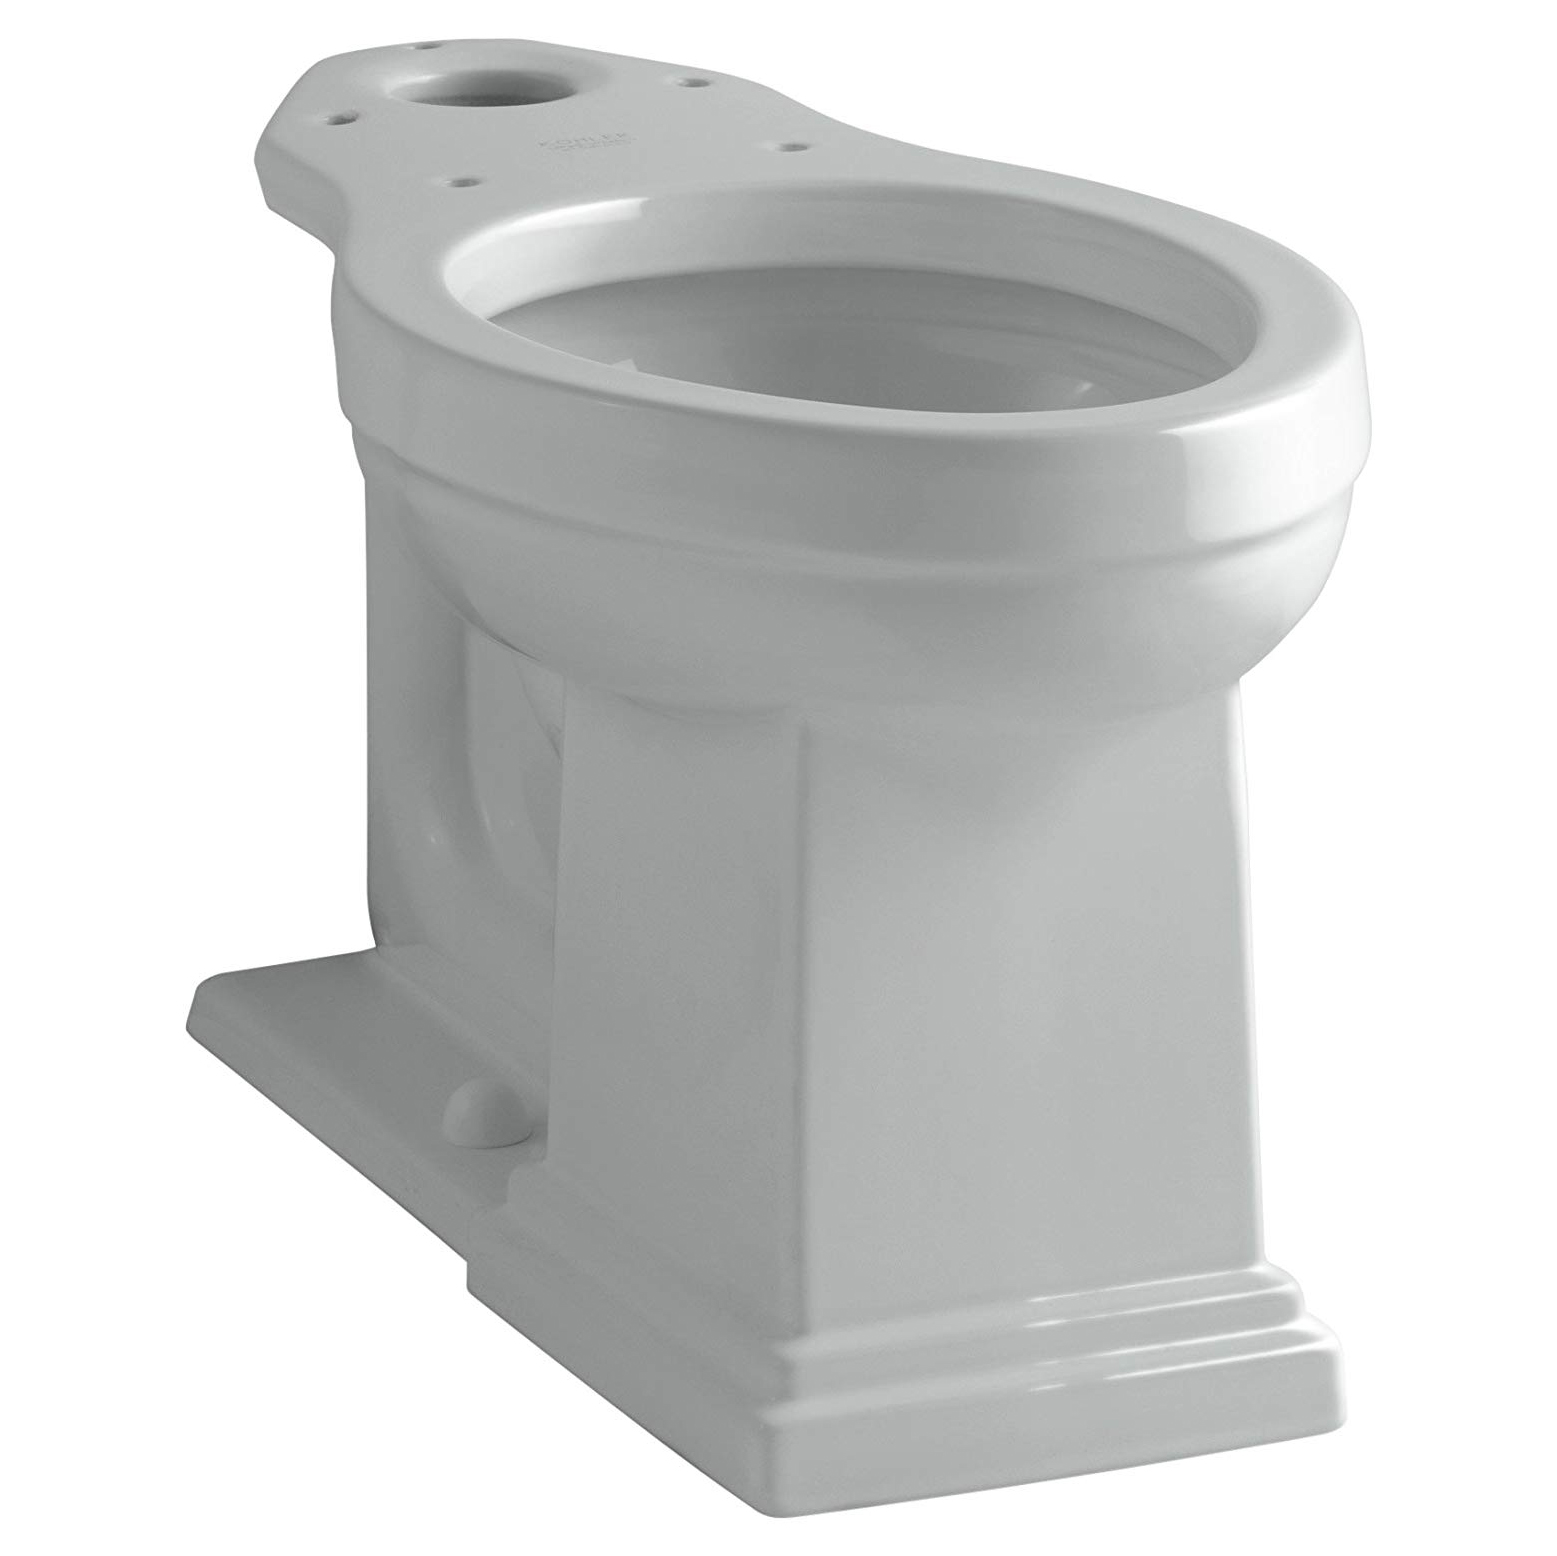 Tresham Comfort Height Elongated Toilet Bowl Only in Ice Grey **SEAT NOT INCLUDED**